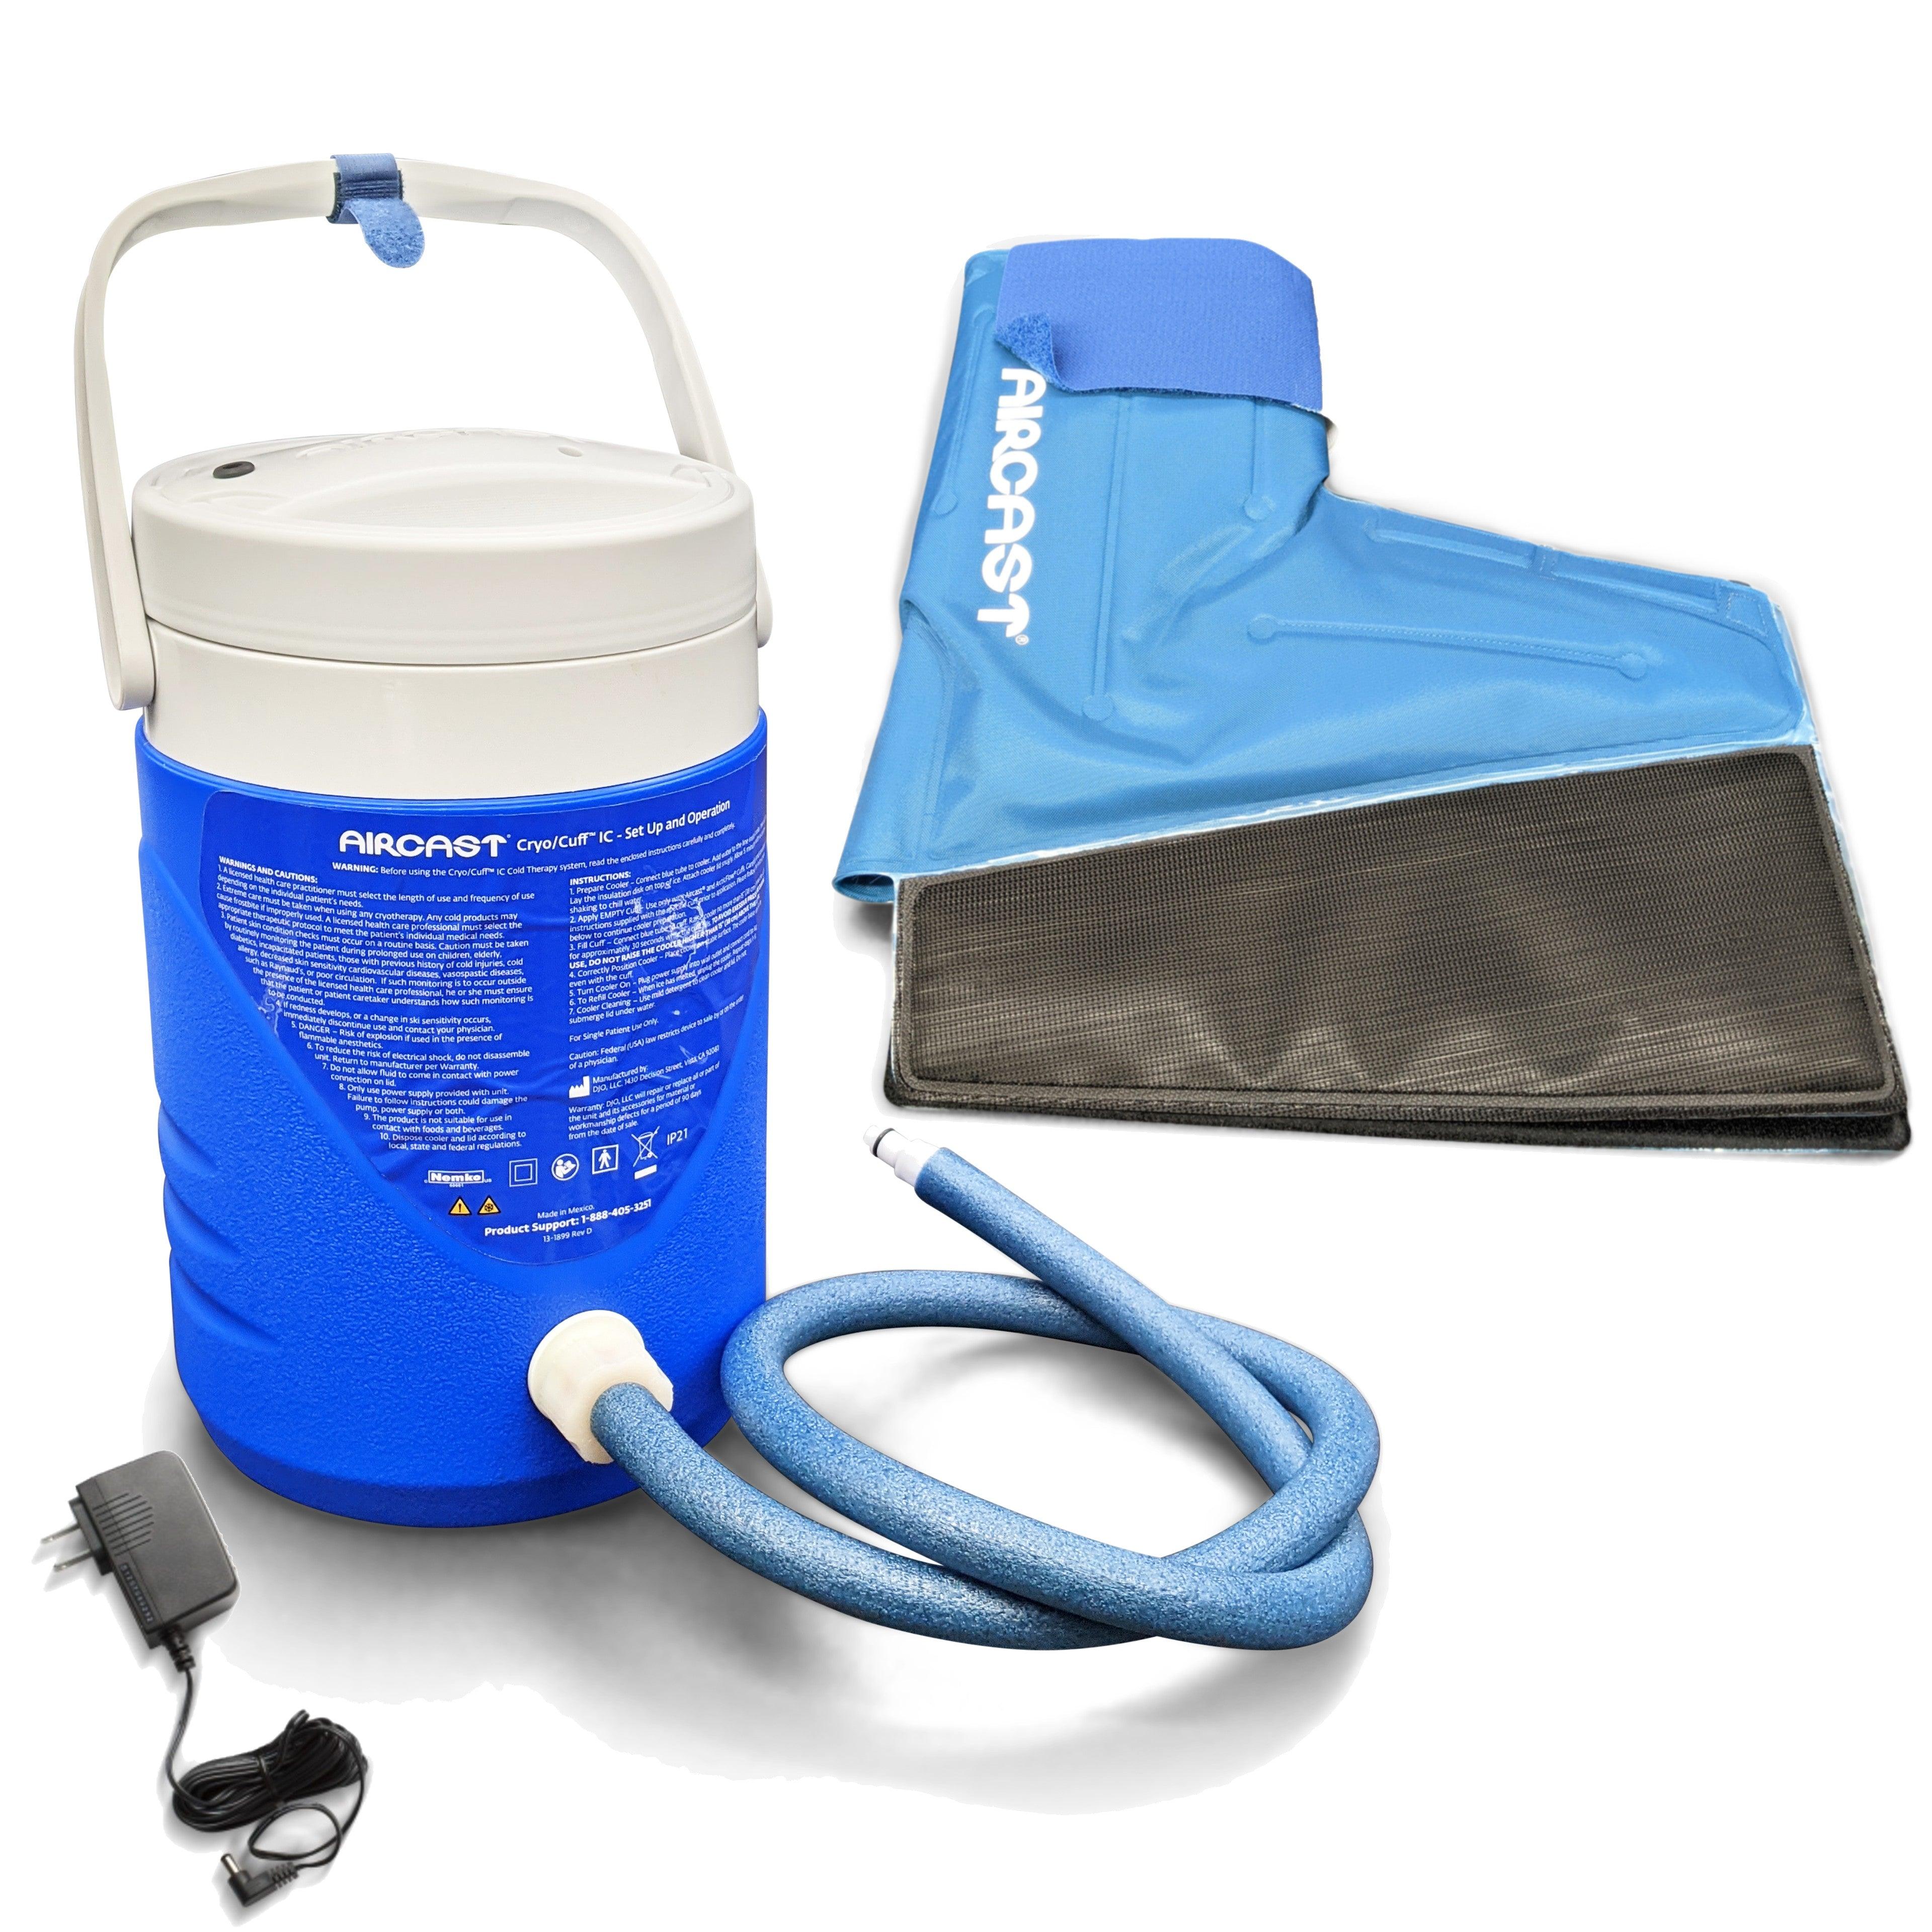 Aircast® Ankle Cryo Cuff & IC Cooler - 51A-10A01 Aircast® Ankle Cryo Cuff & IC Cooler - undefined by Supply Physical Therapy Aircast, CryoCuffMain, Foot and Ankle